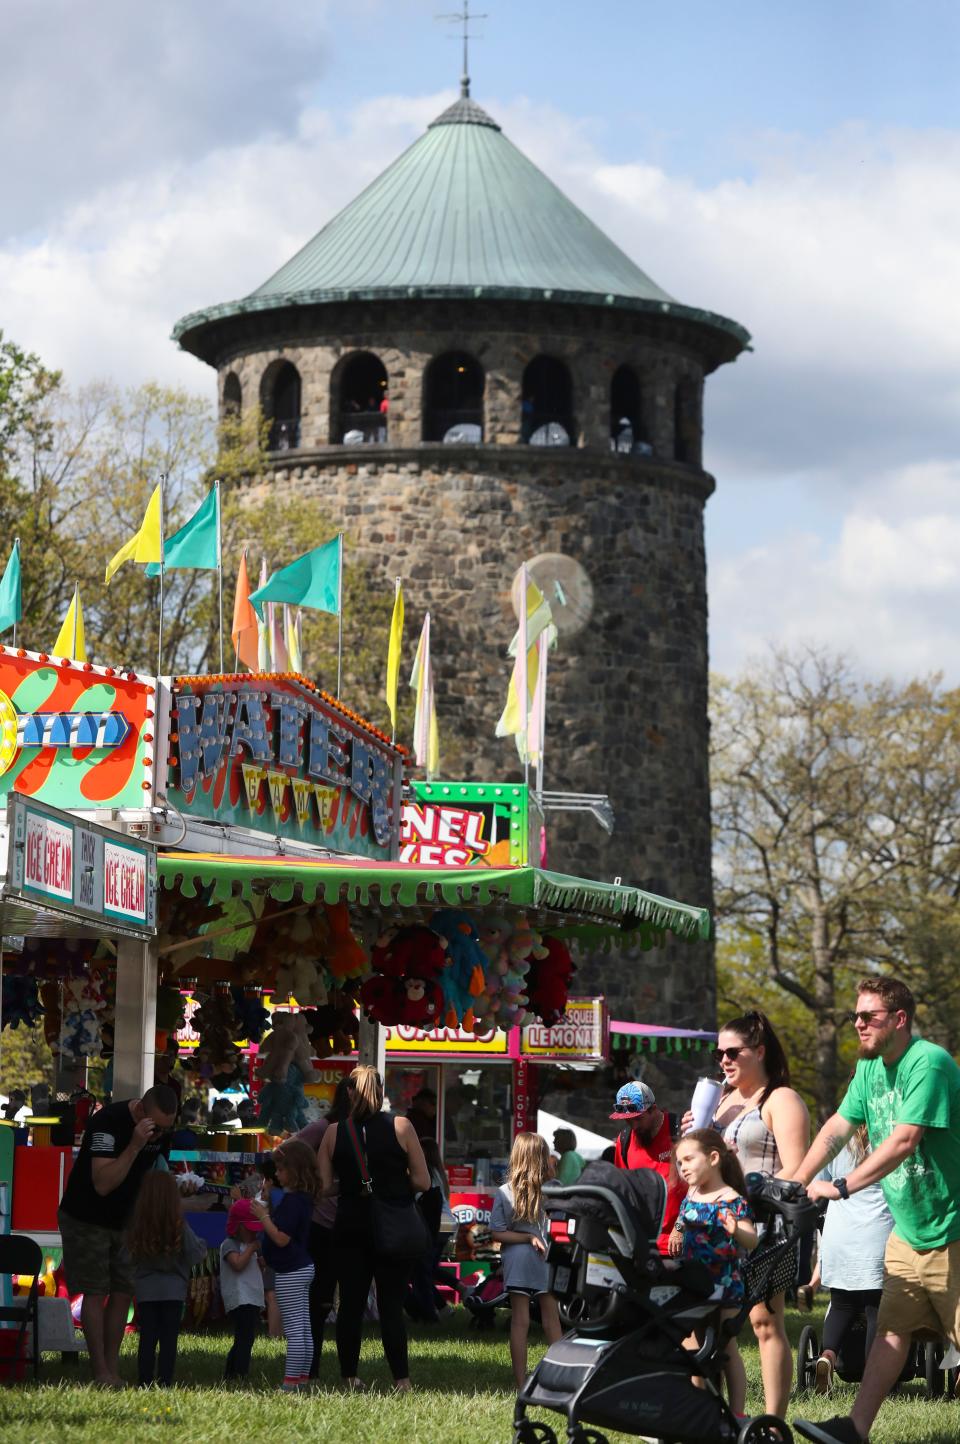 The Rockford Tower serves as stately backdrop on the first day of the Wilmington Flower Market in Rockford Park, Thursday, May 5, 2022.